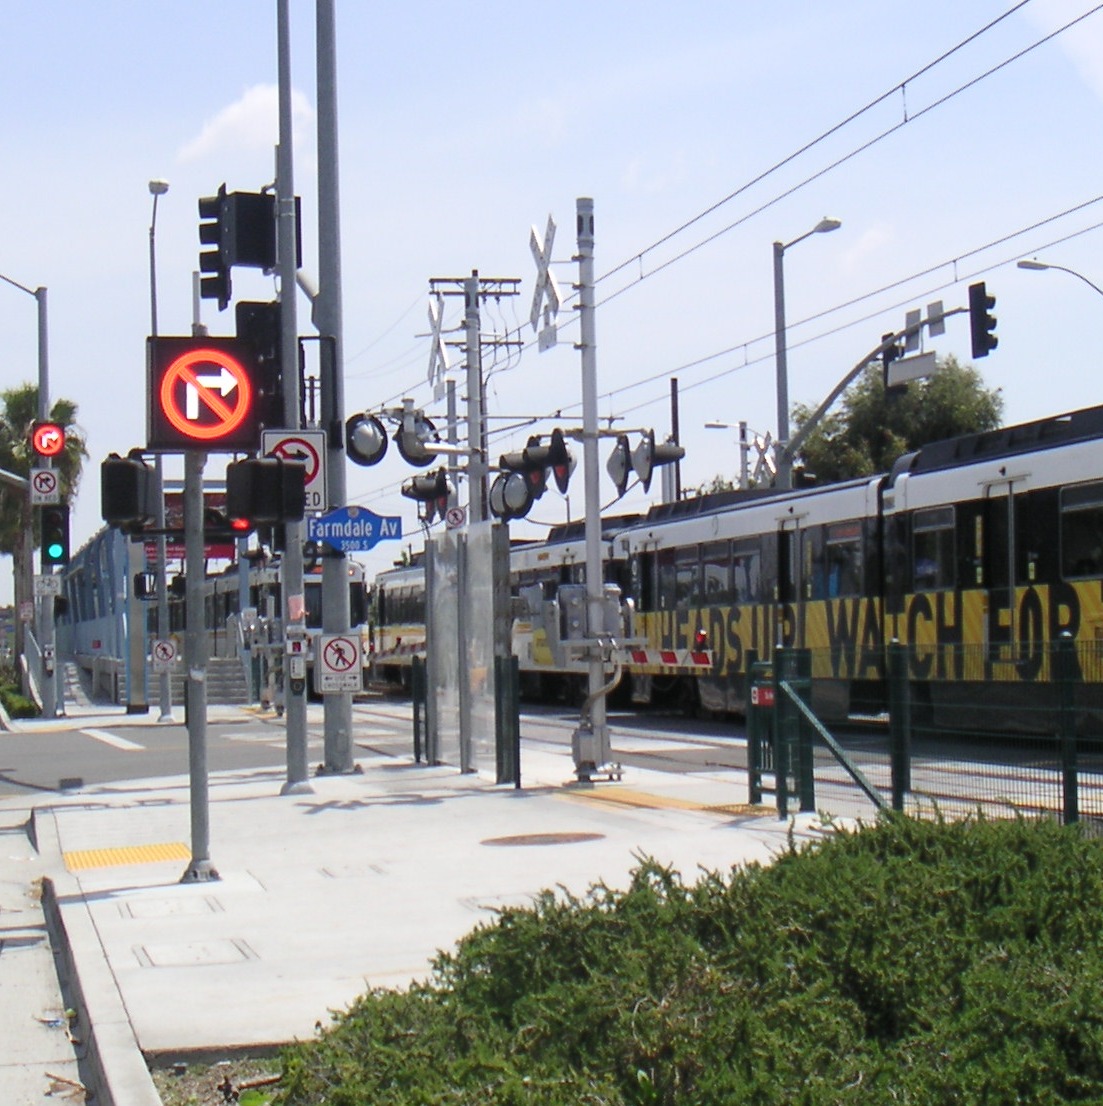 Blank Out signs at Farmdale and Expo Line, West
                LA